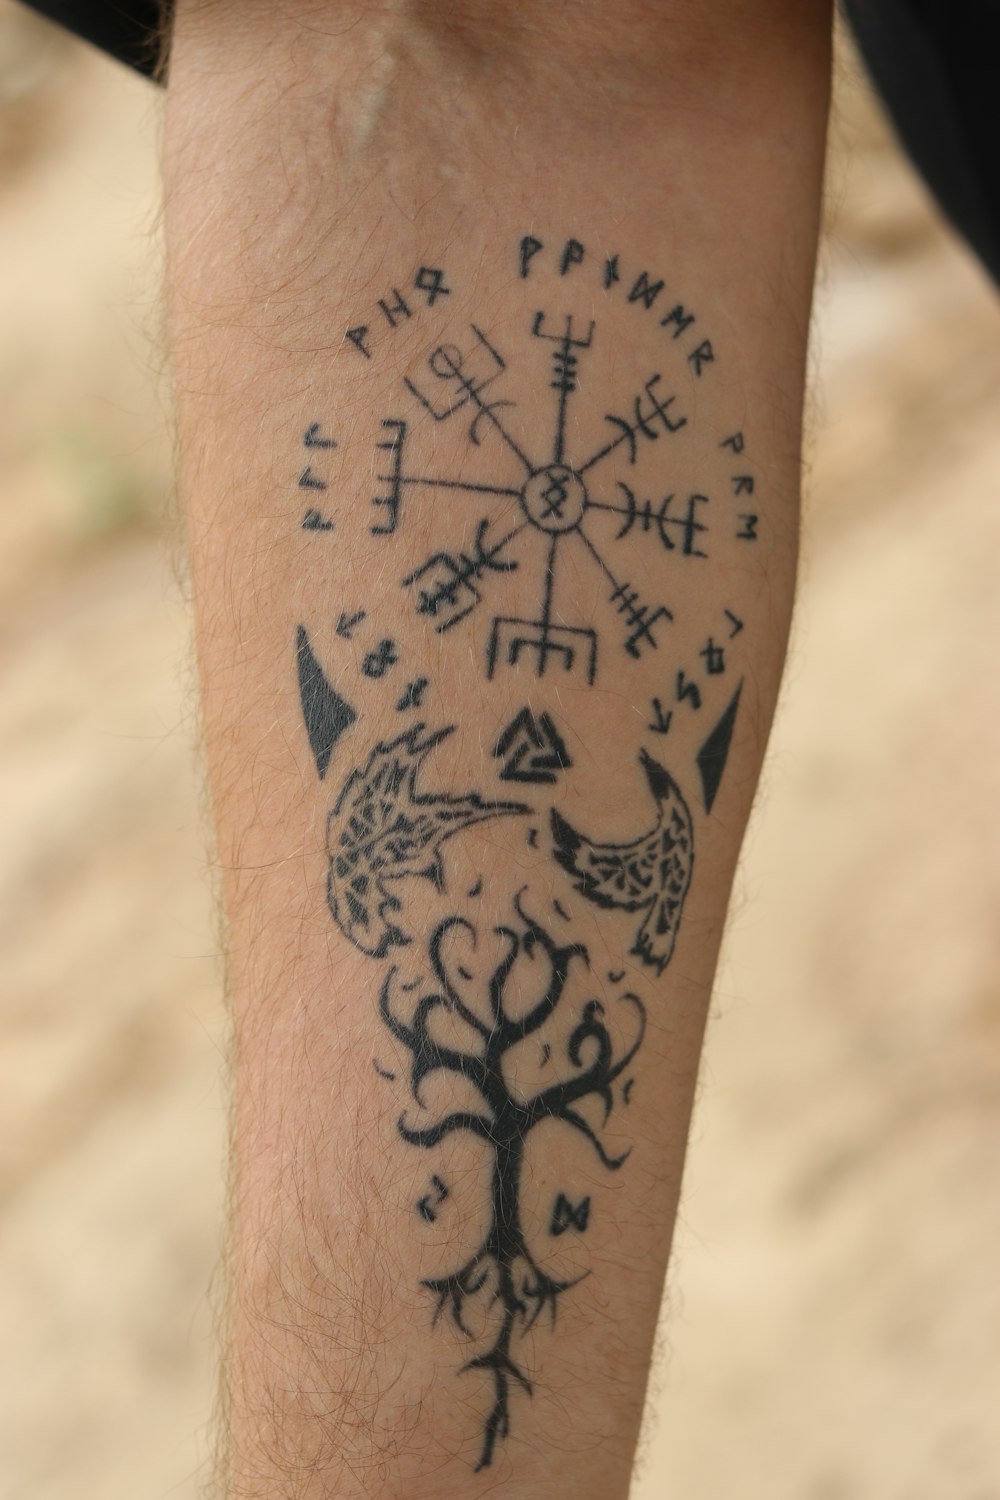 a person's arm with writing on it